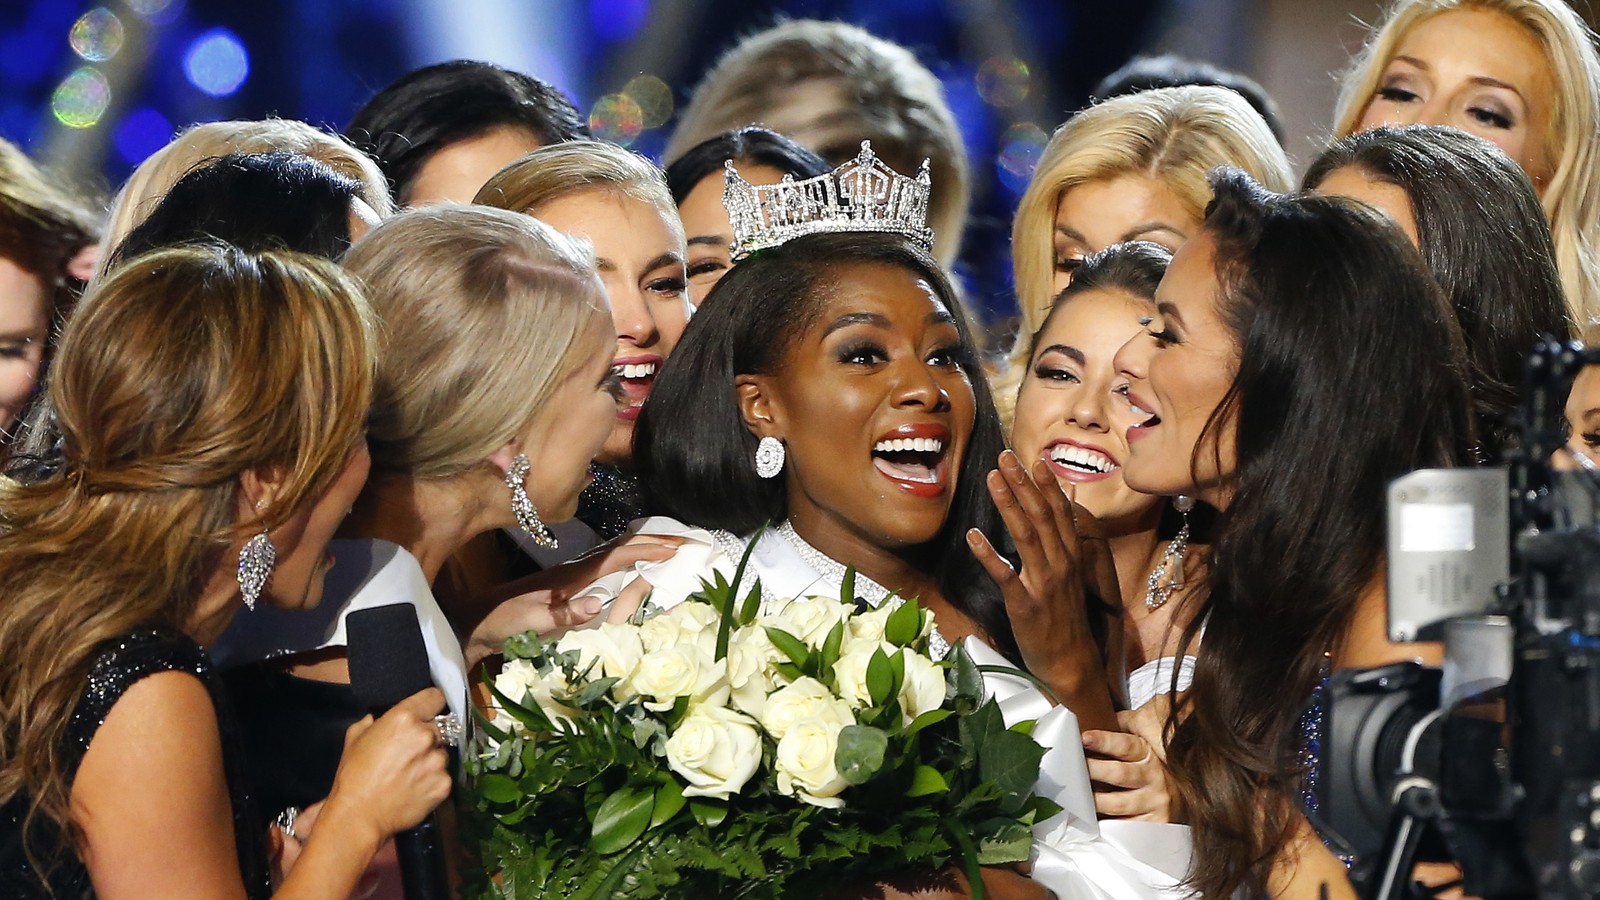 New Miss Louisiana Holli' Conway focused on Miss America Pageant